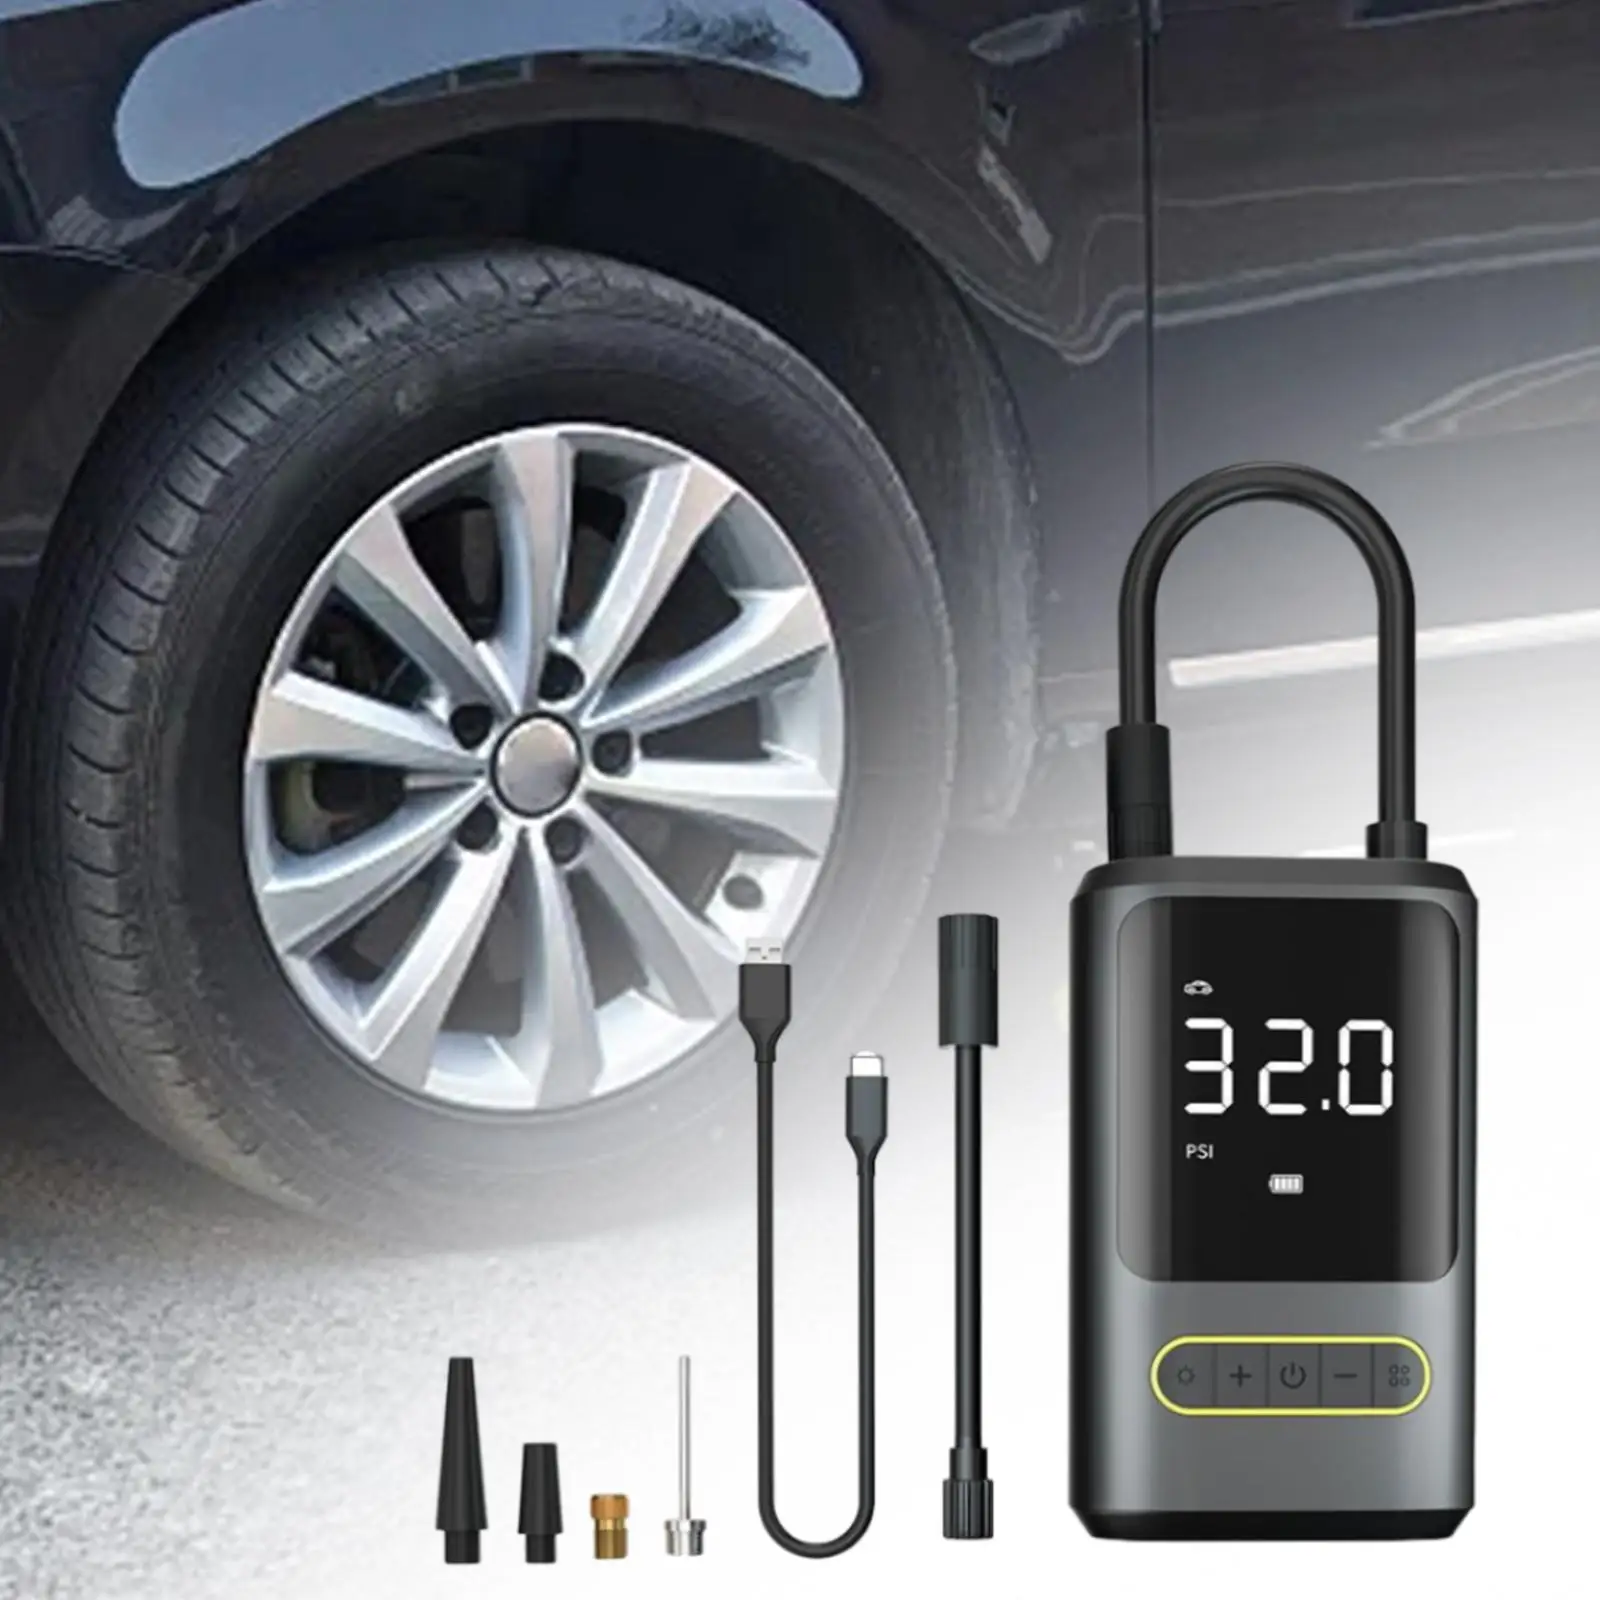 Automobile Tire Inflator Pump Small Handheld Fast Inflation Tire Pressure Detection Portable Tire Air Pump fors SUV